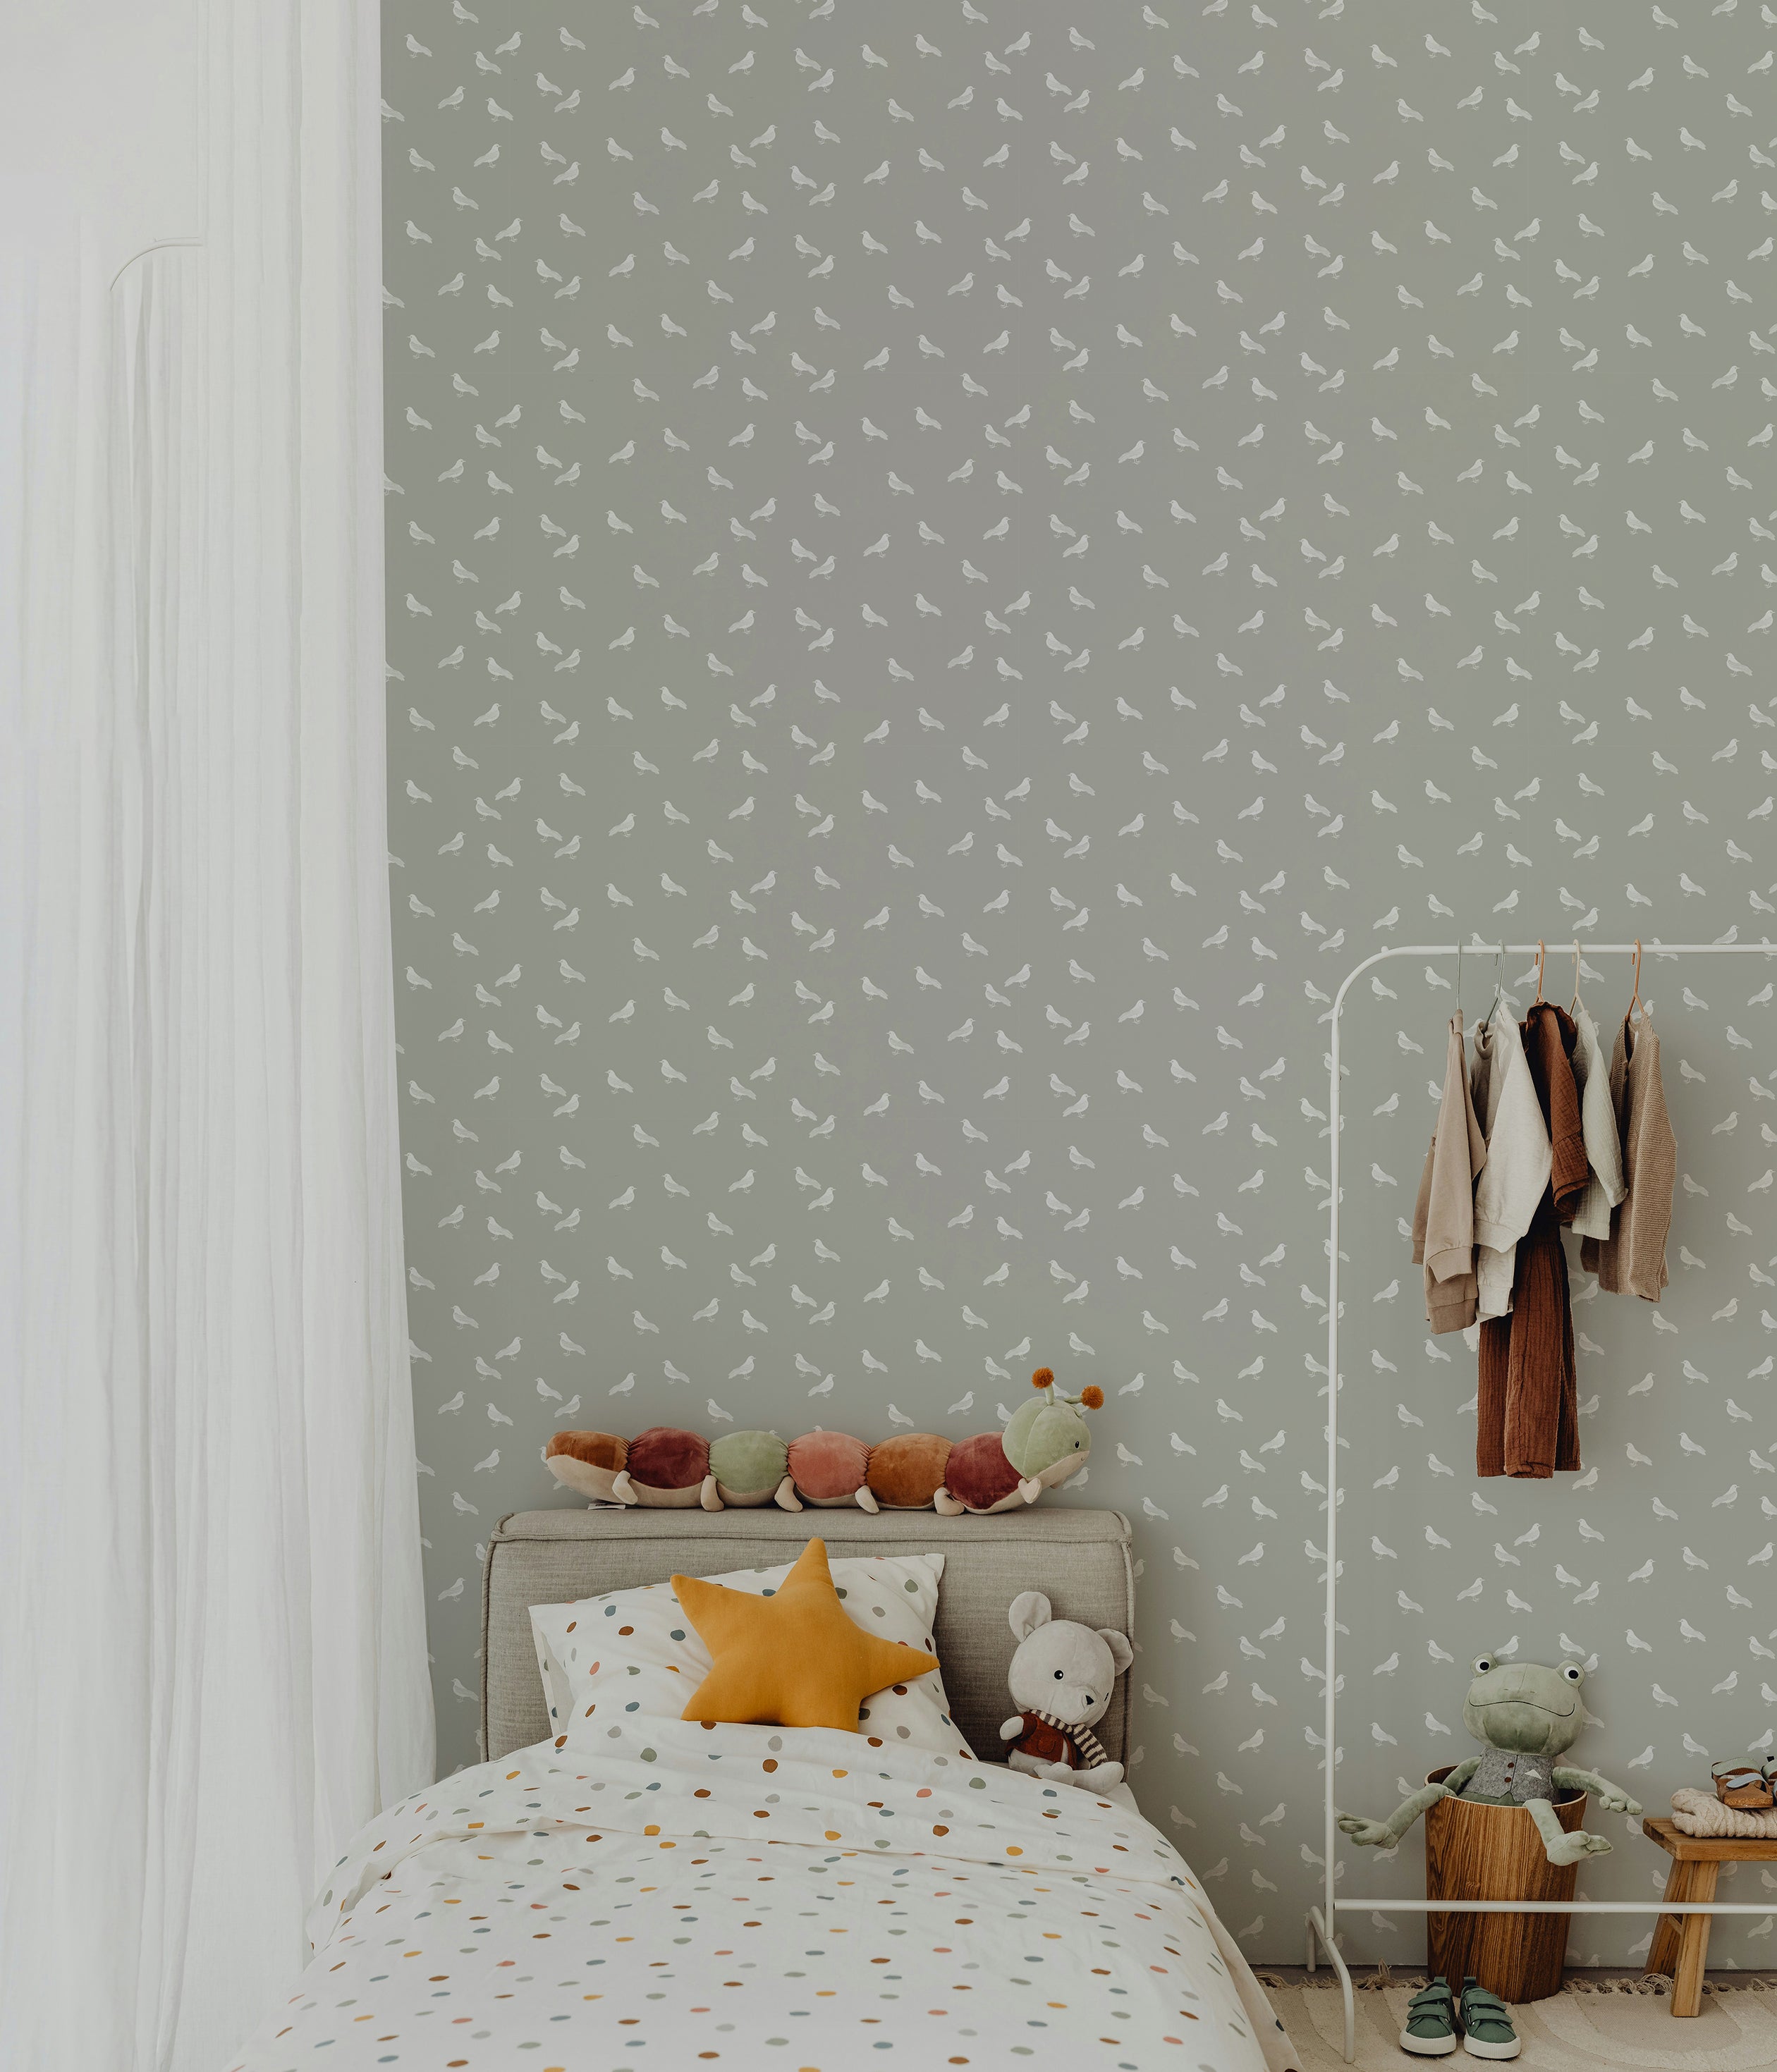 A cozy children's bedroom with a bed dressed in polka dot bedding and stuffed animals, featuring a muted green wallpaper with small white bird patterns, adding a whimsical and peaceful touch